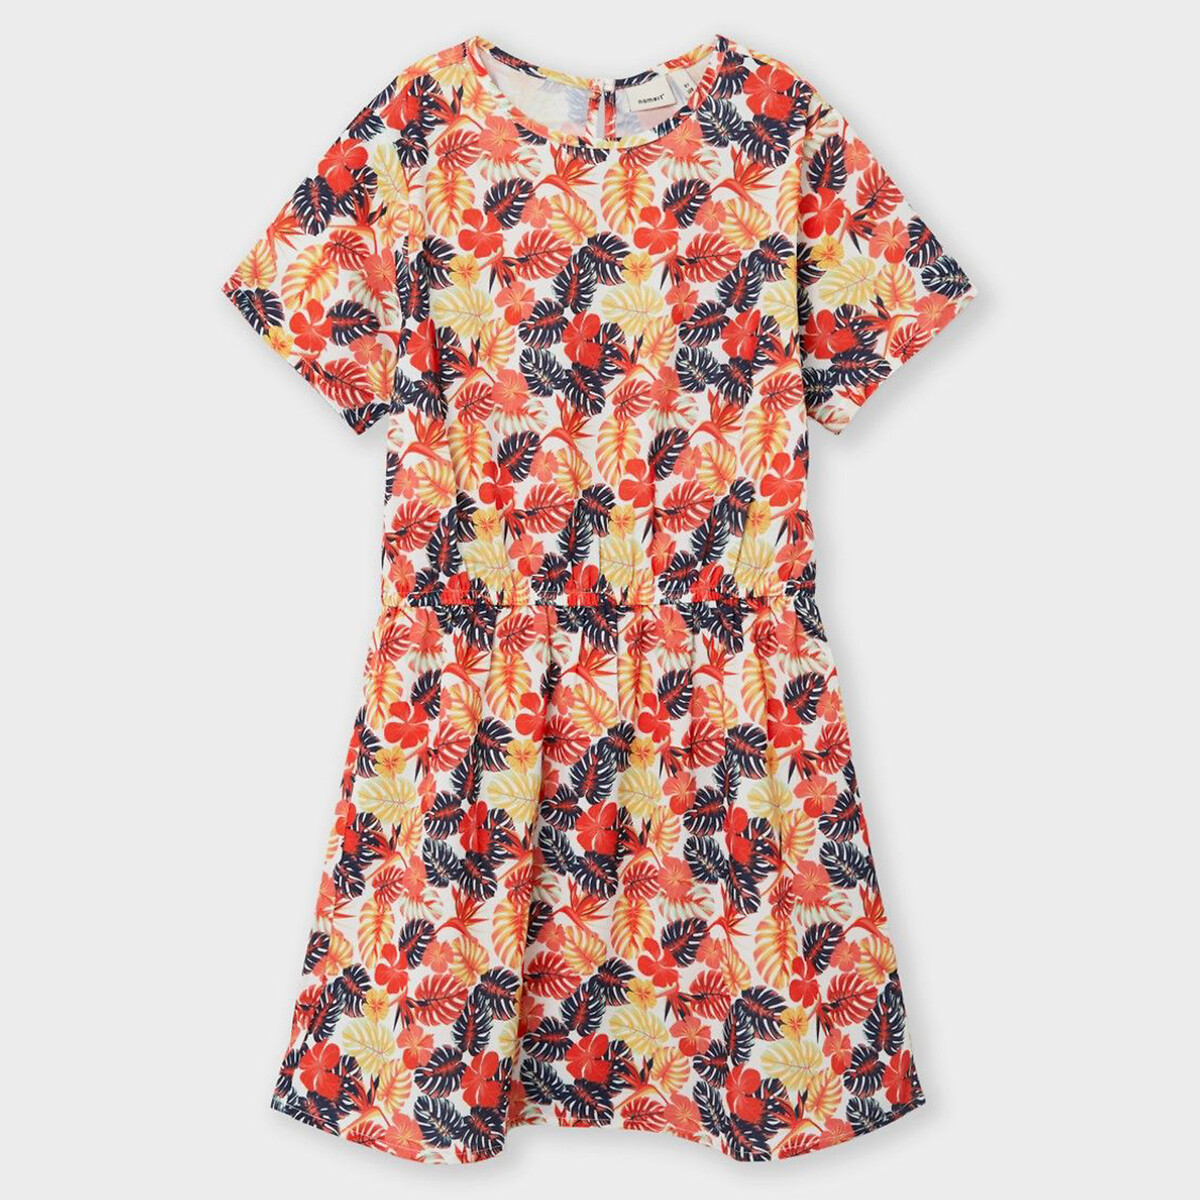 Image of Recycled Floral Print Dress with Short Sleeves